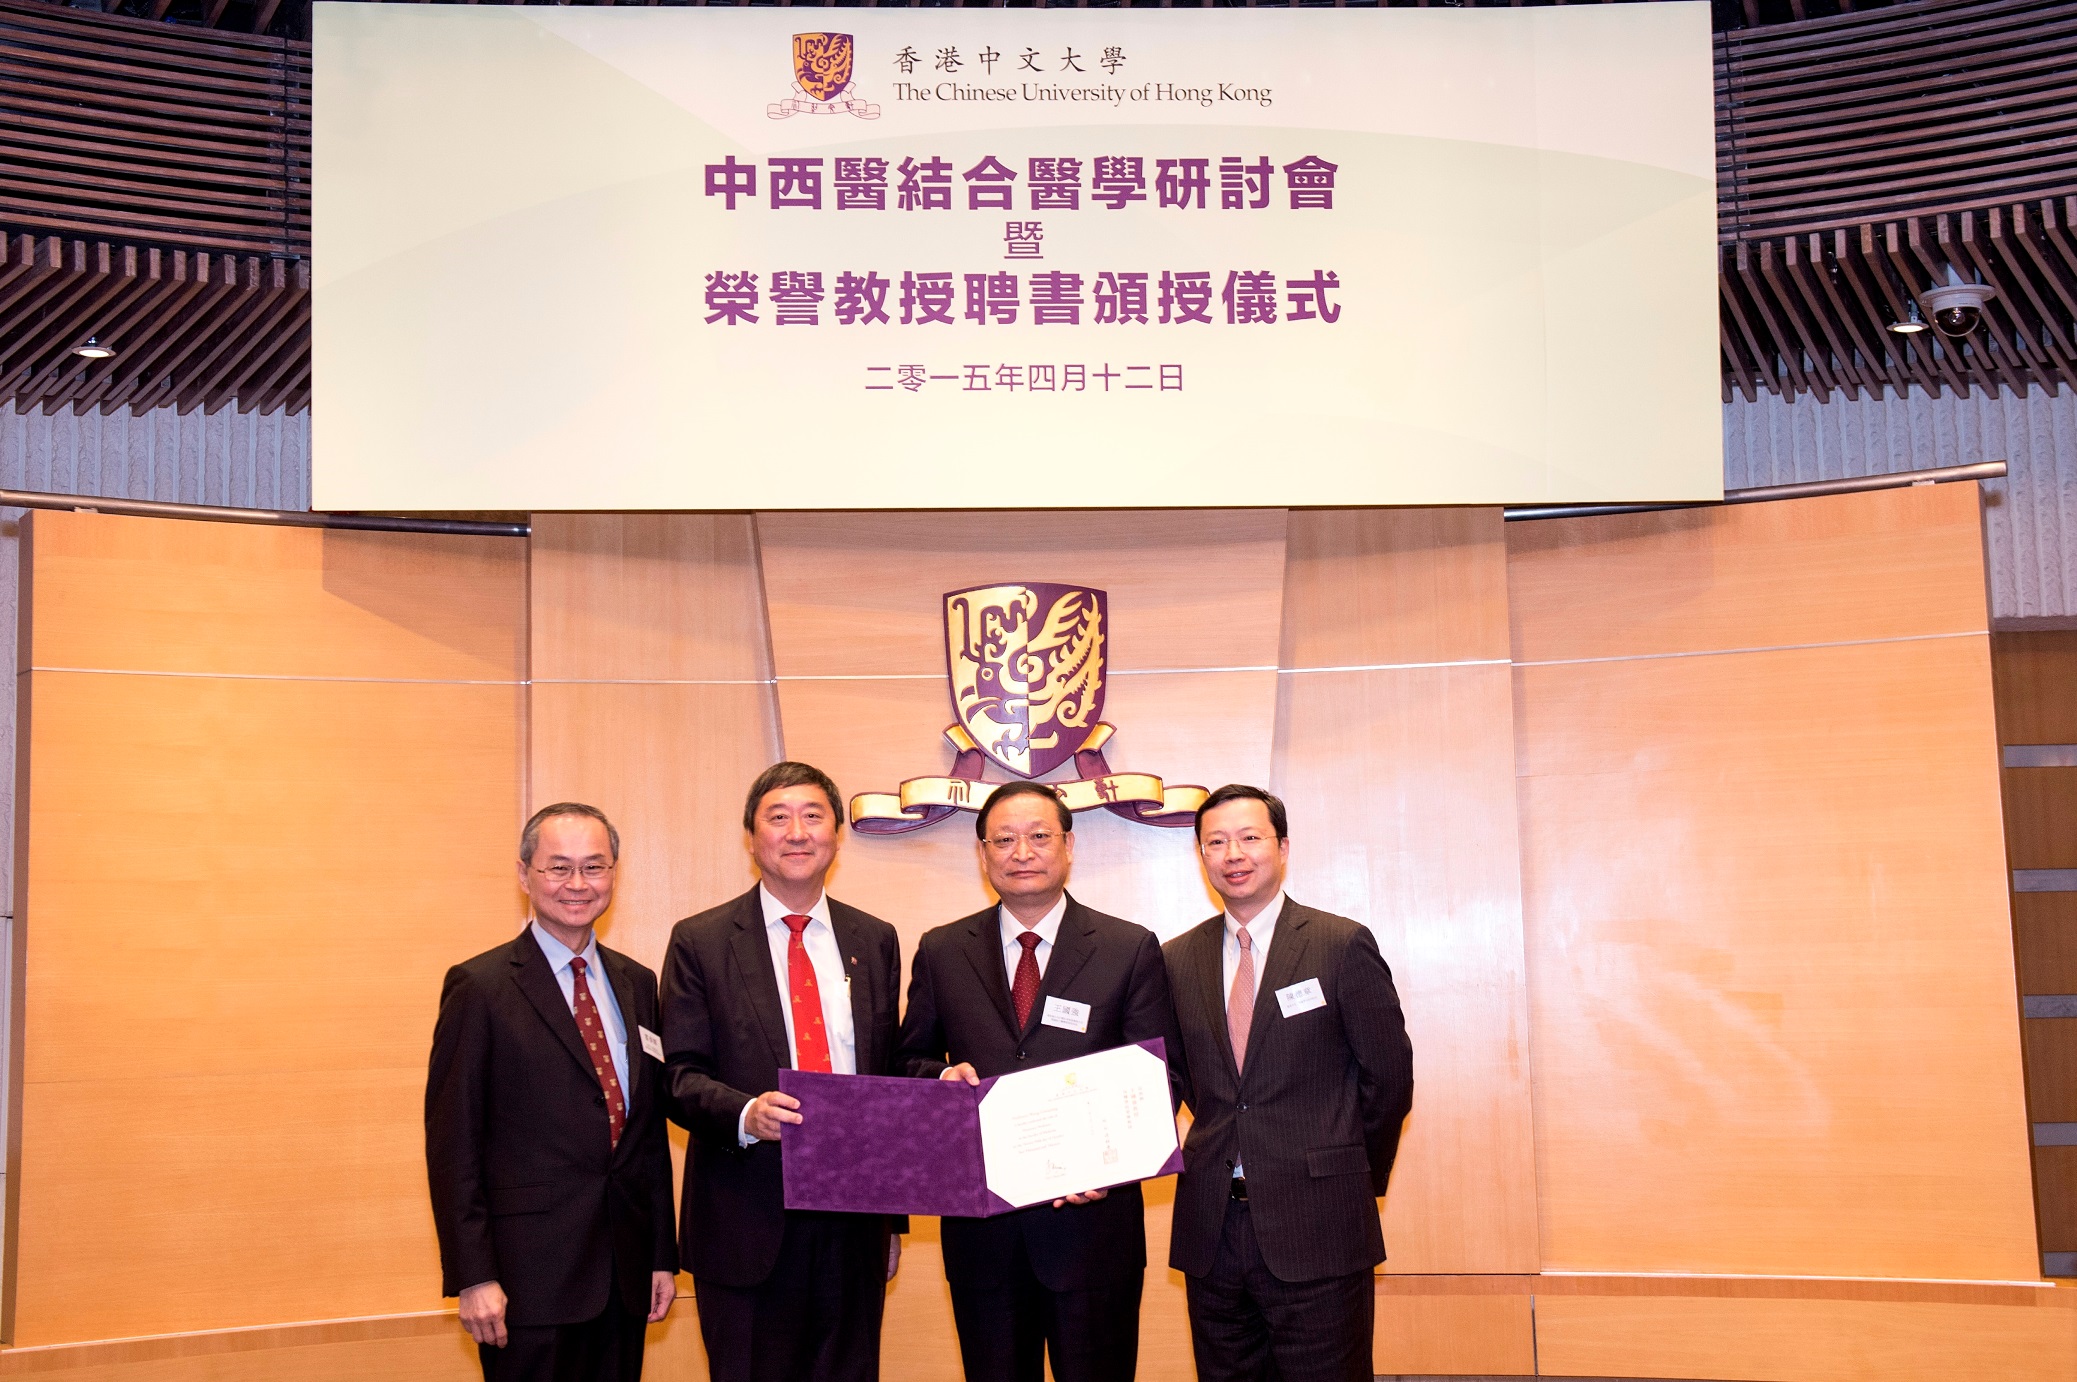 Prof. Wang Guoqiang is presented with an honorary professorship at CUHK by Prof. Joseph Sung